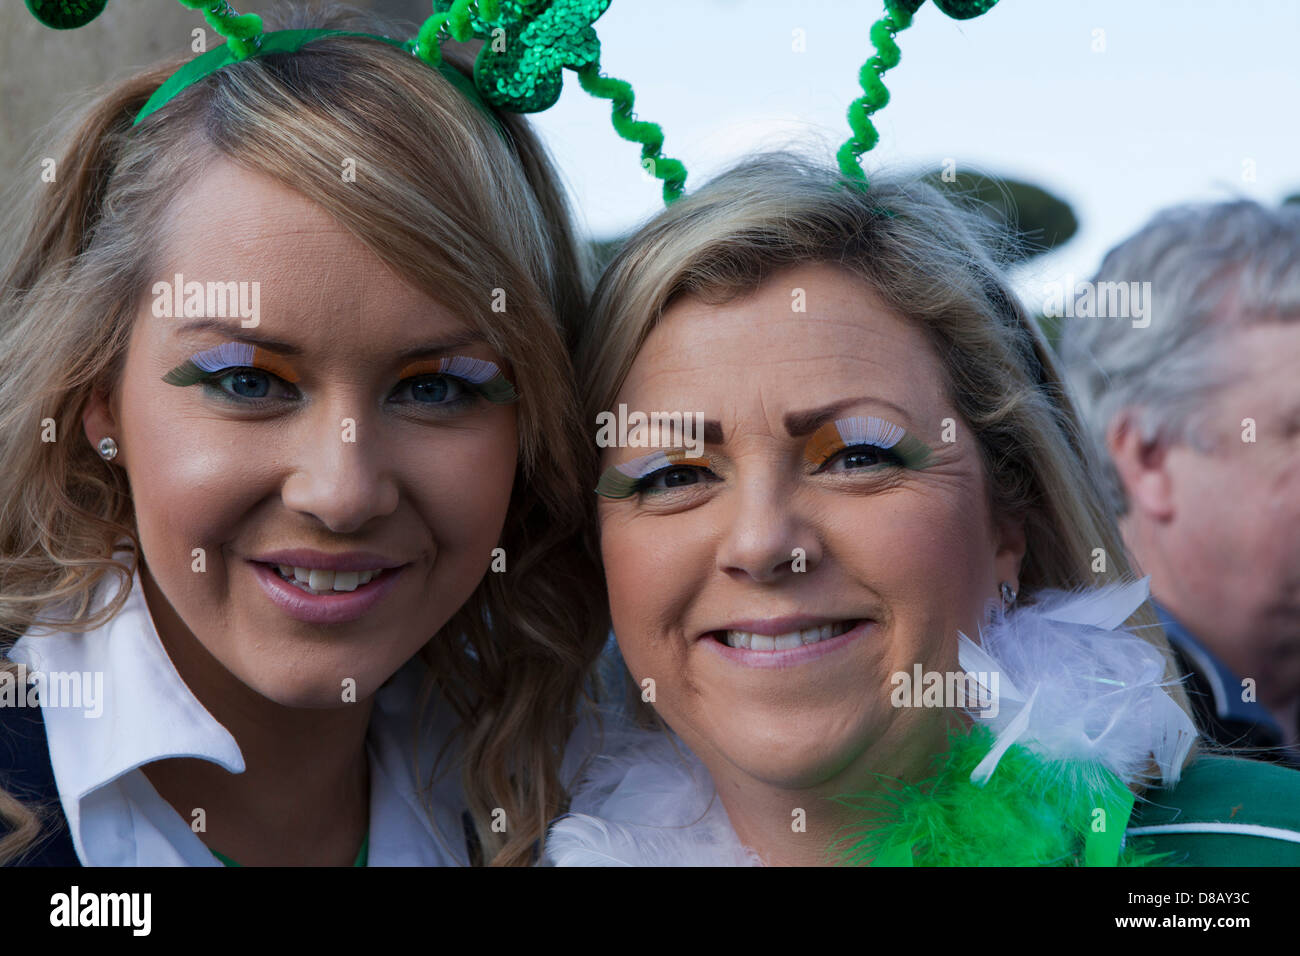 Two girls twenties supporting Ireland rugby team in Rome with painted eyelashes Stock Photo